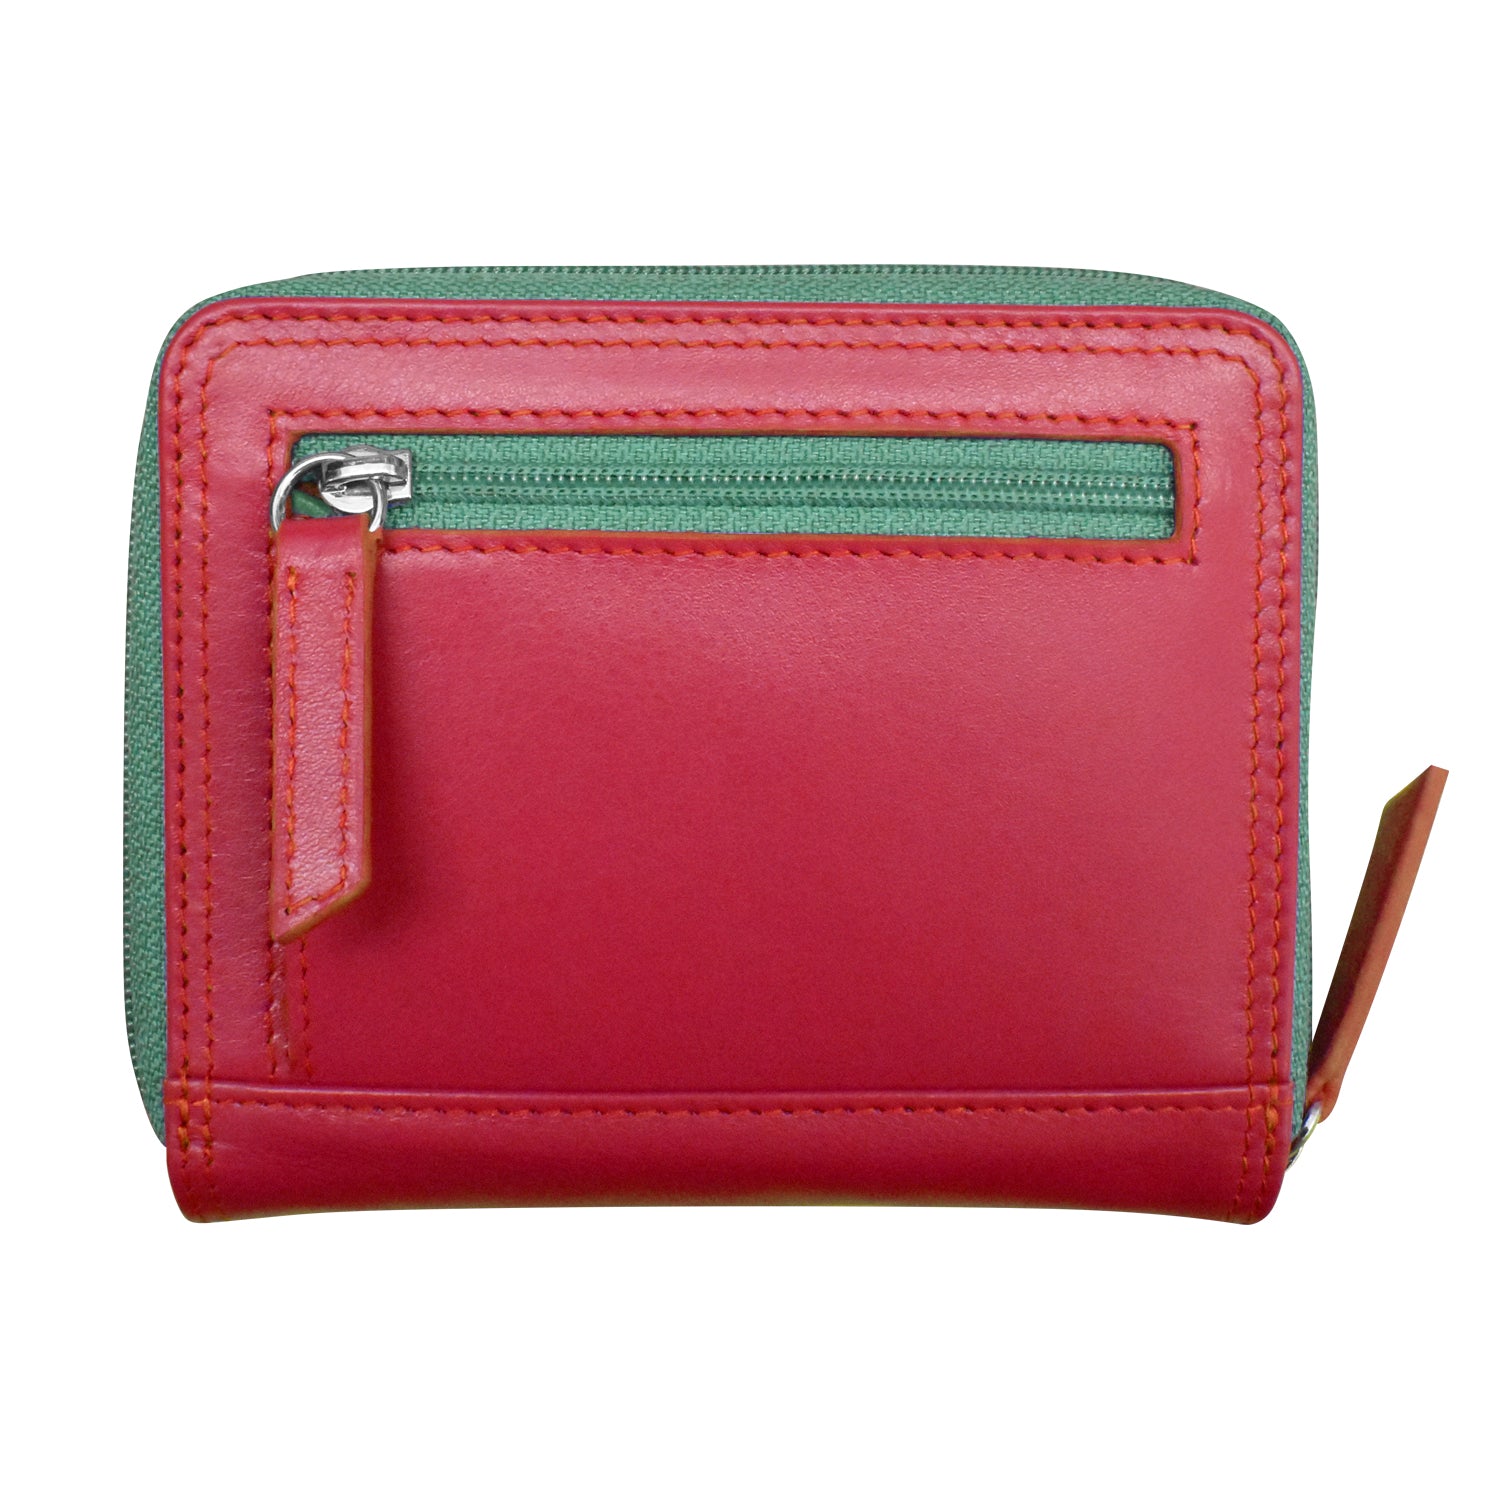 Tuscany Leather Woman's Double Zip Around Leather Wallet